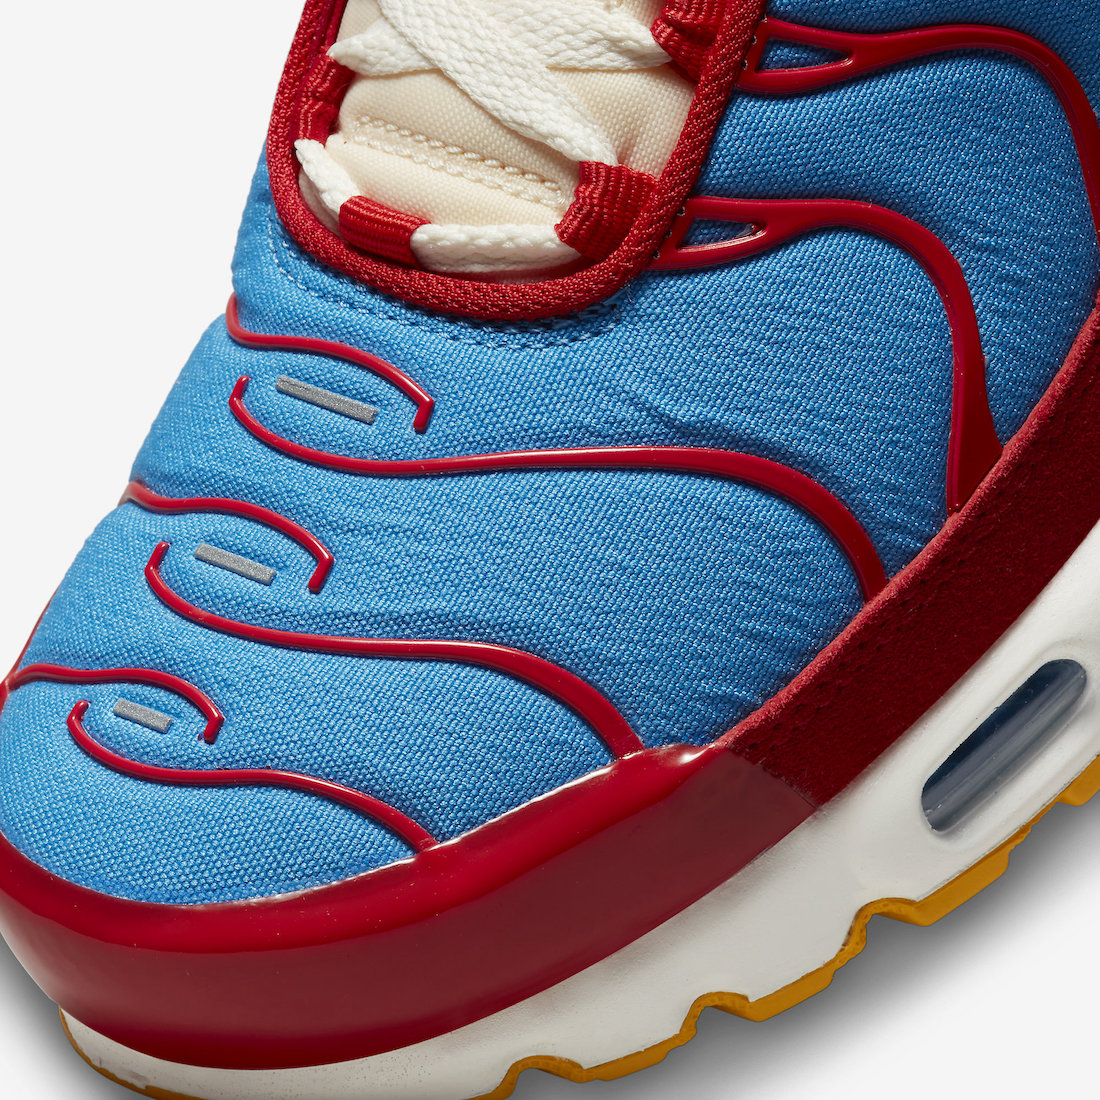 Nike red and blue air max Air Max Plus SE Running Club DC9332-600 Release Date - SBD